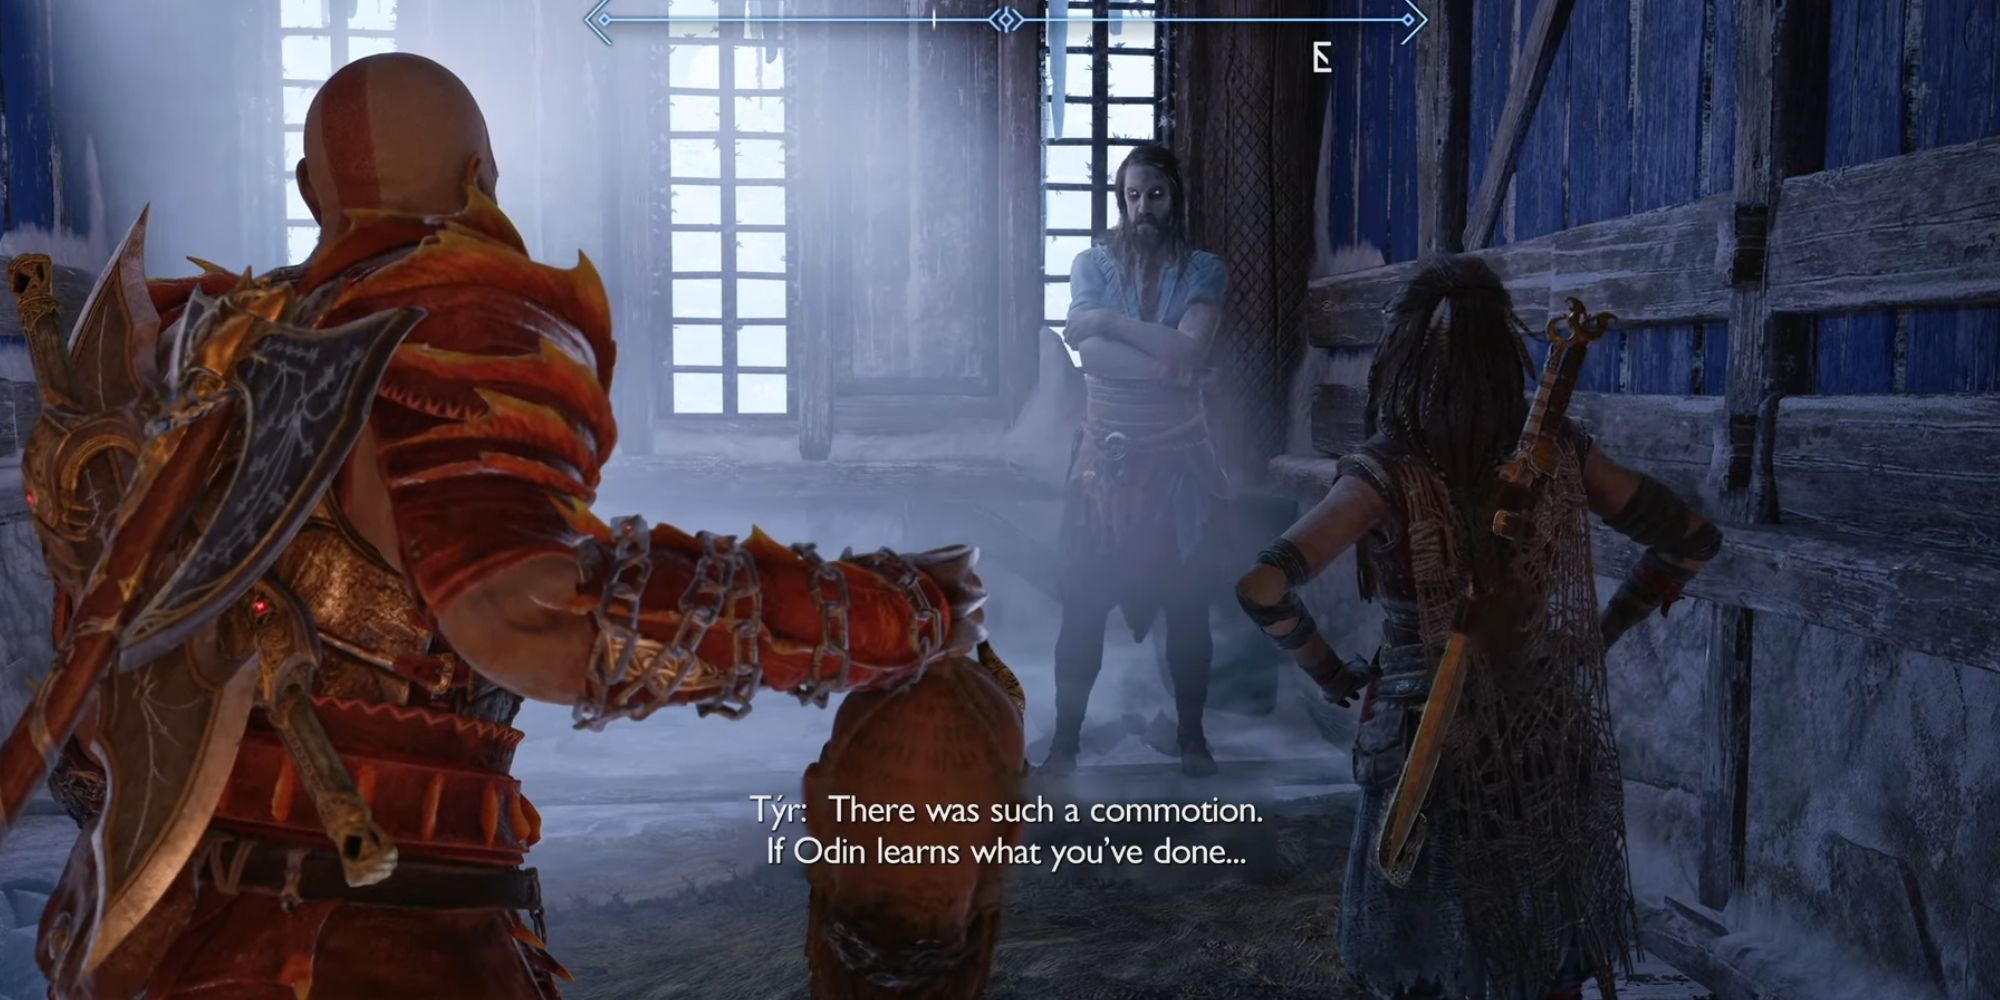 Kratos holding Mimir's head up and standing next to Freya. In front of them stands Tyr with his arms folded. Tyr is currently talking.